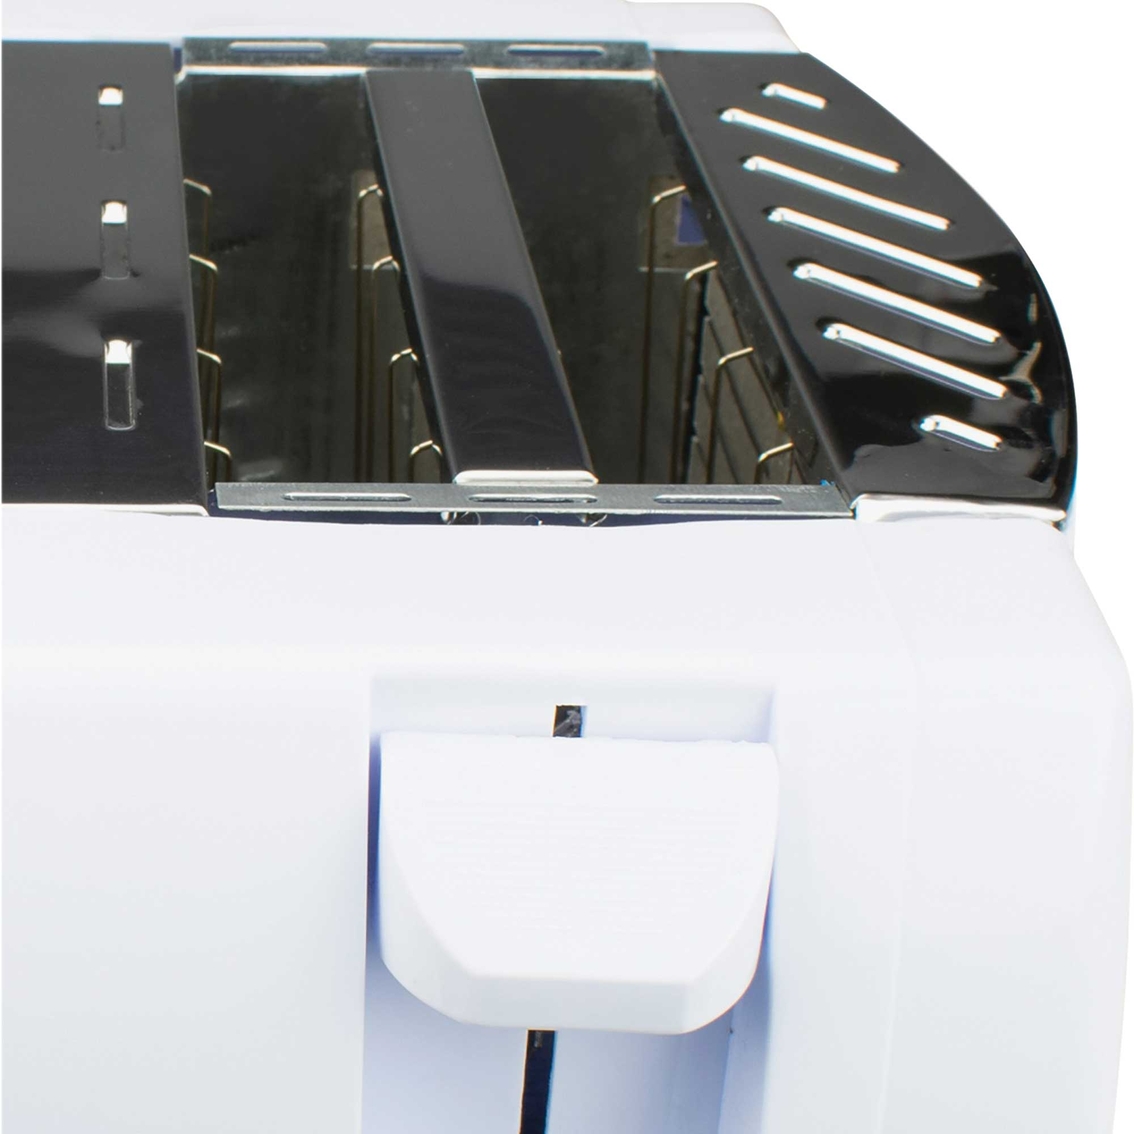 Brentwood Cool Touch 4 Slice Toaster, White - Image 5 of 6